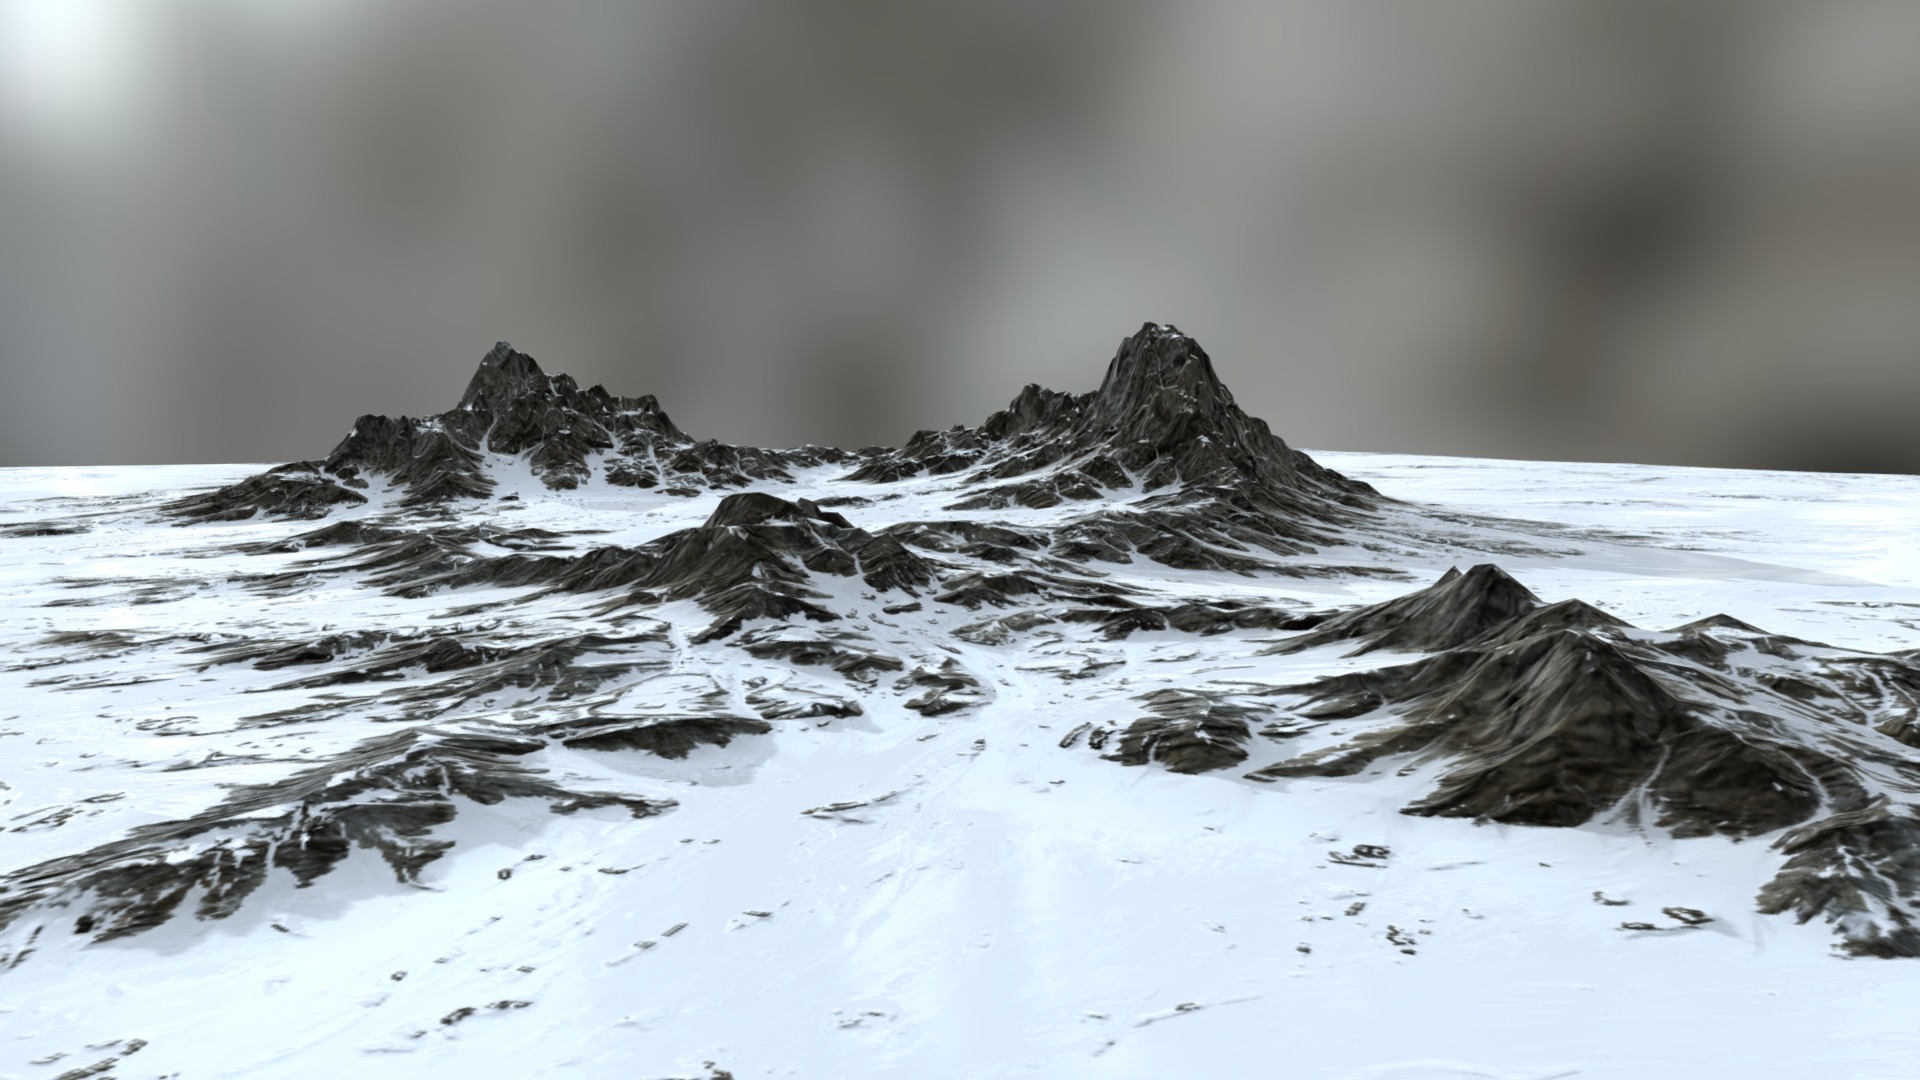 3D model Terrain Alpine 4k - This is a 3D model of the Terrain Alpine 4k. The 3D model is about a snowy landscape with a rocky mountain.